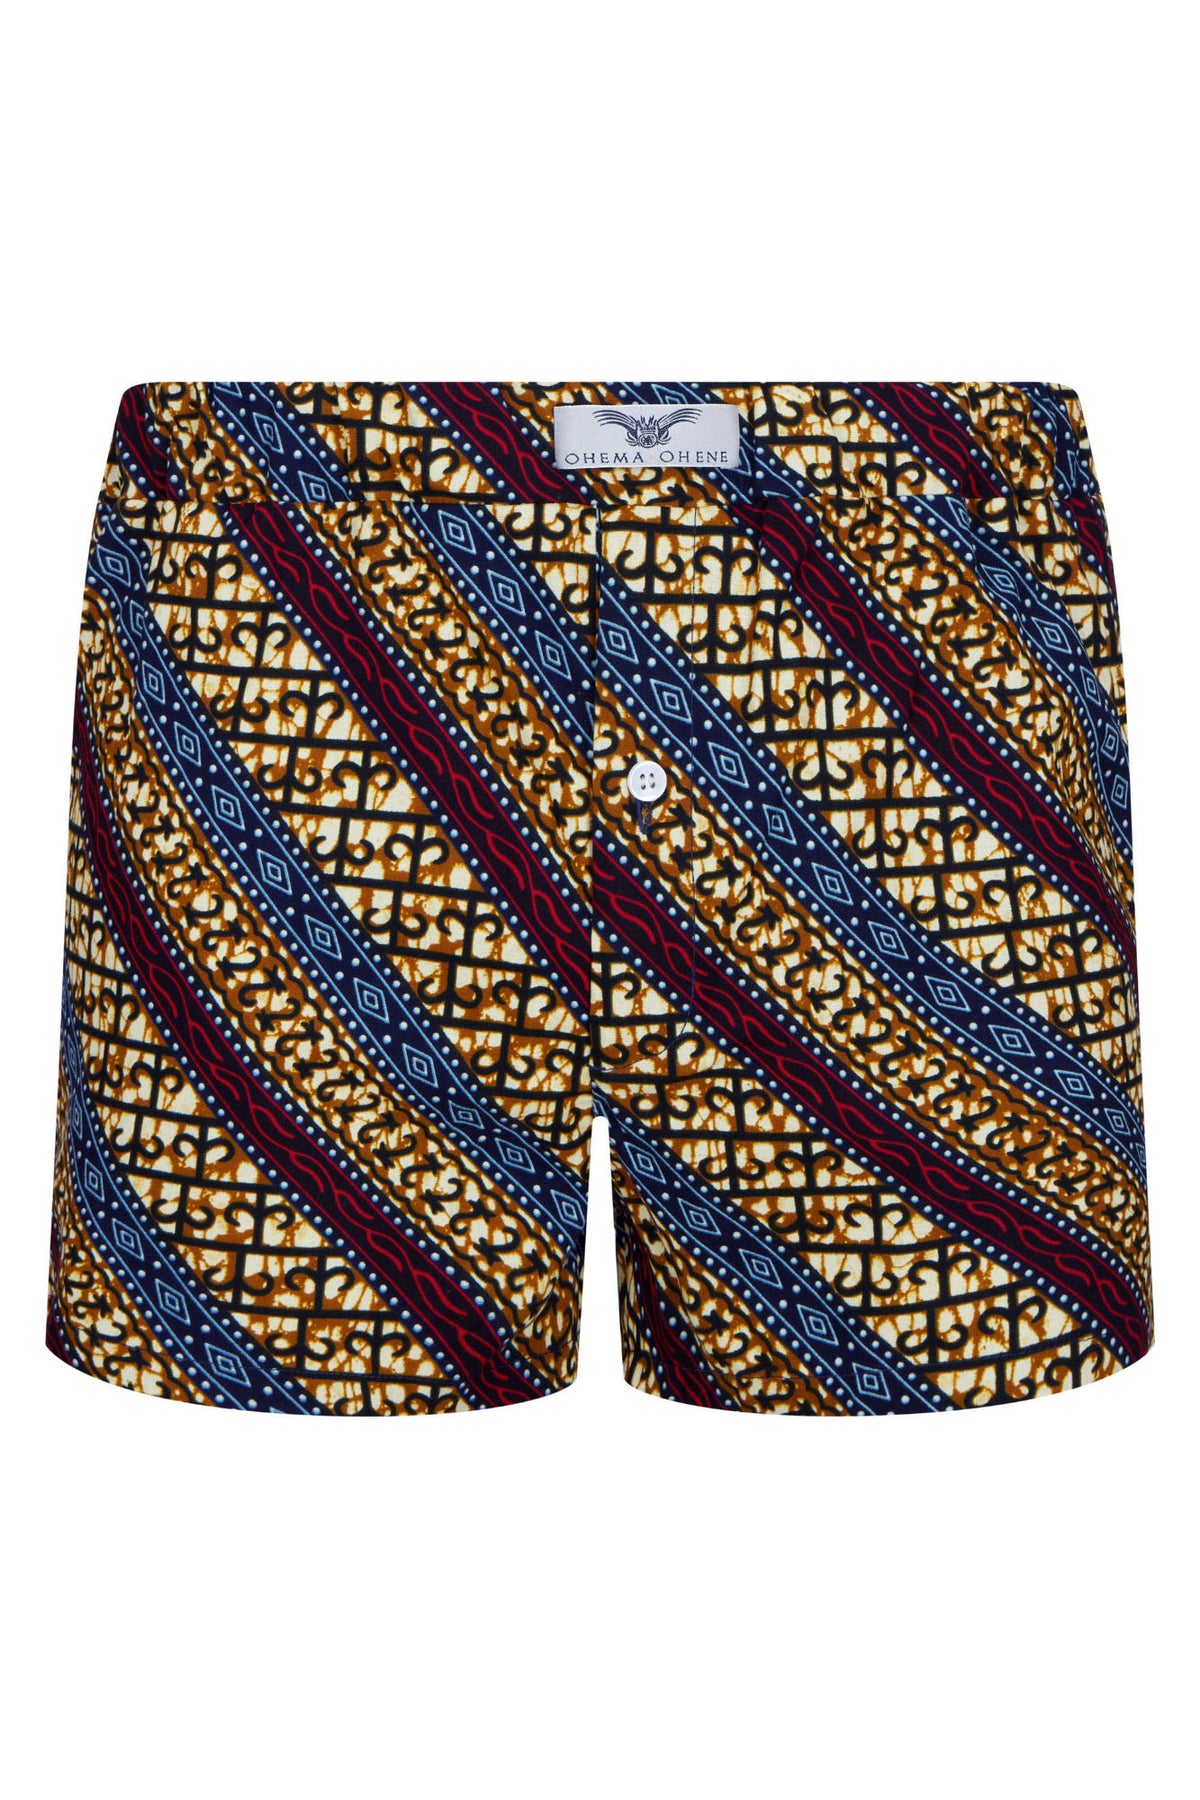 African Print Boxer Shorts-Horibrown - OHEMA OHENE AFRICAN INSPIRED FASHION